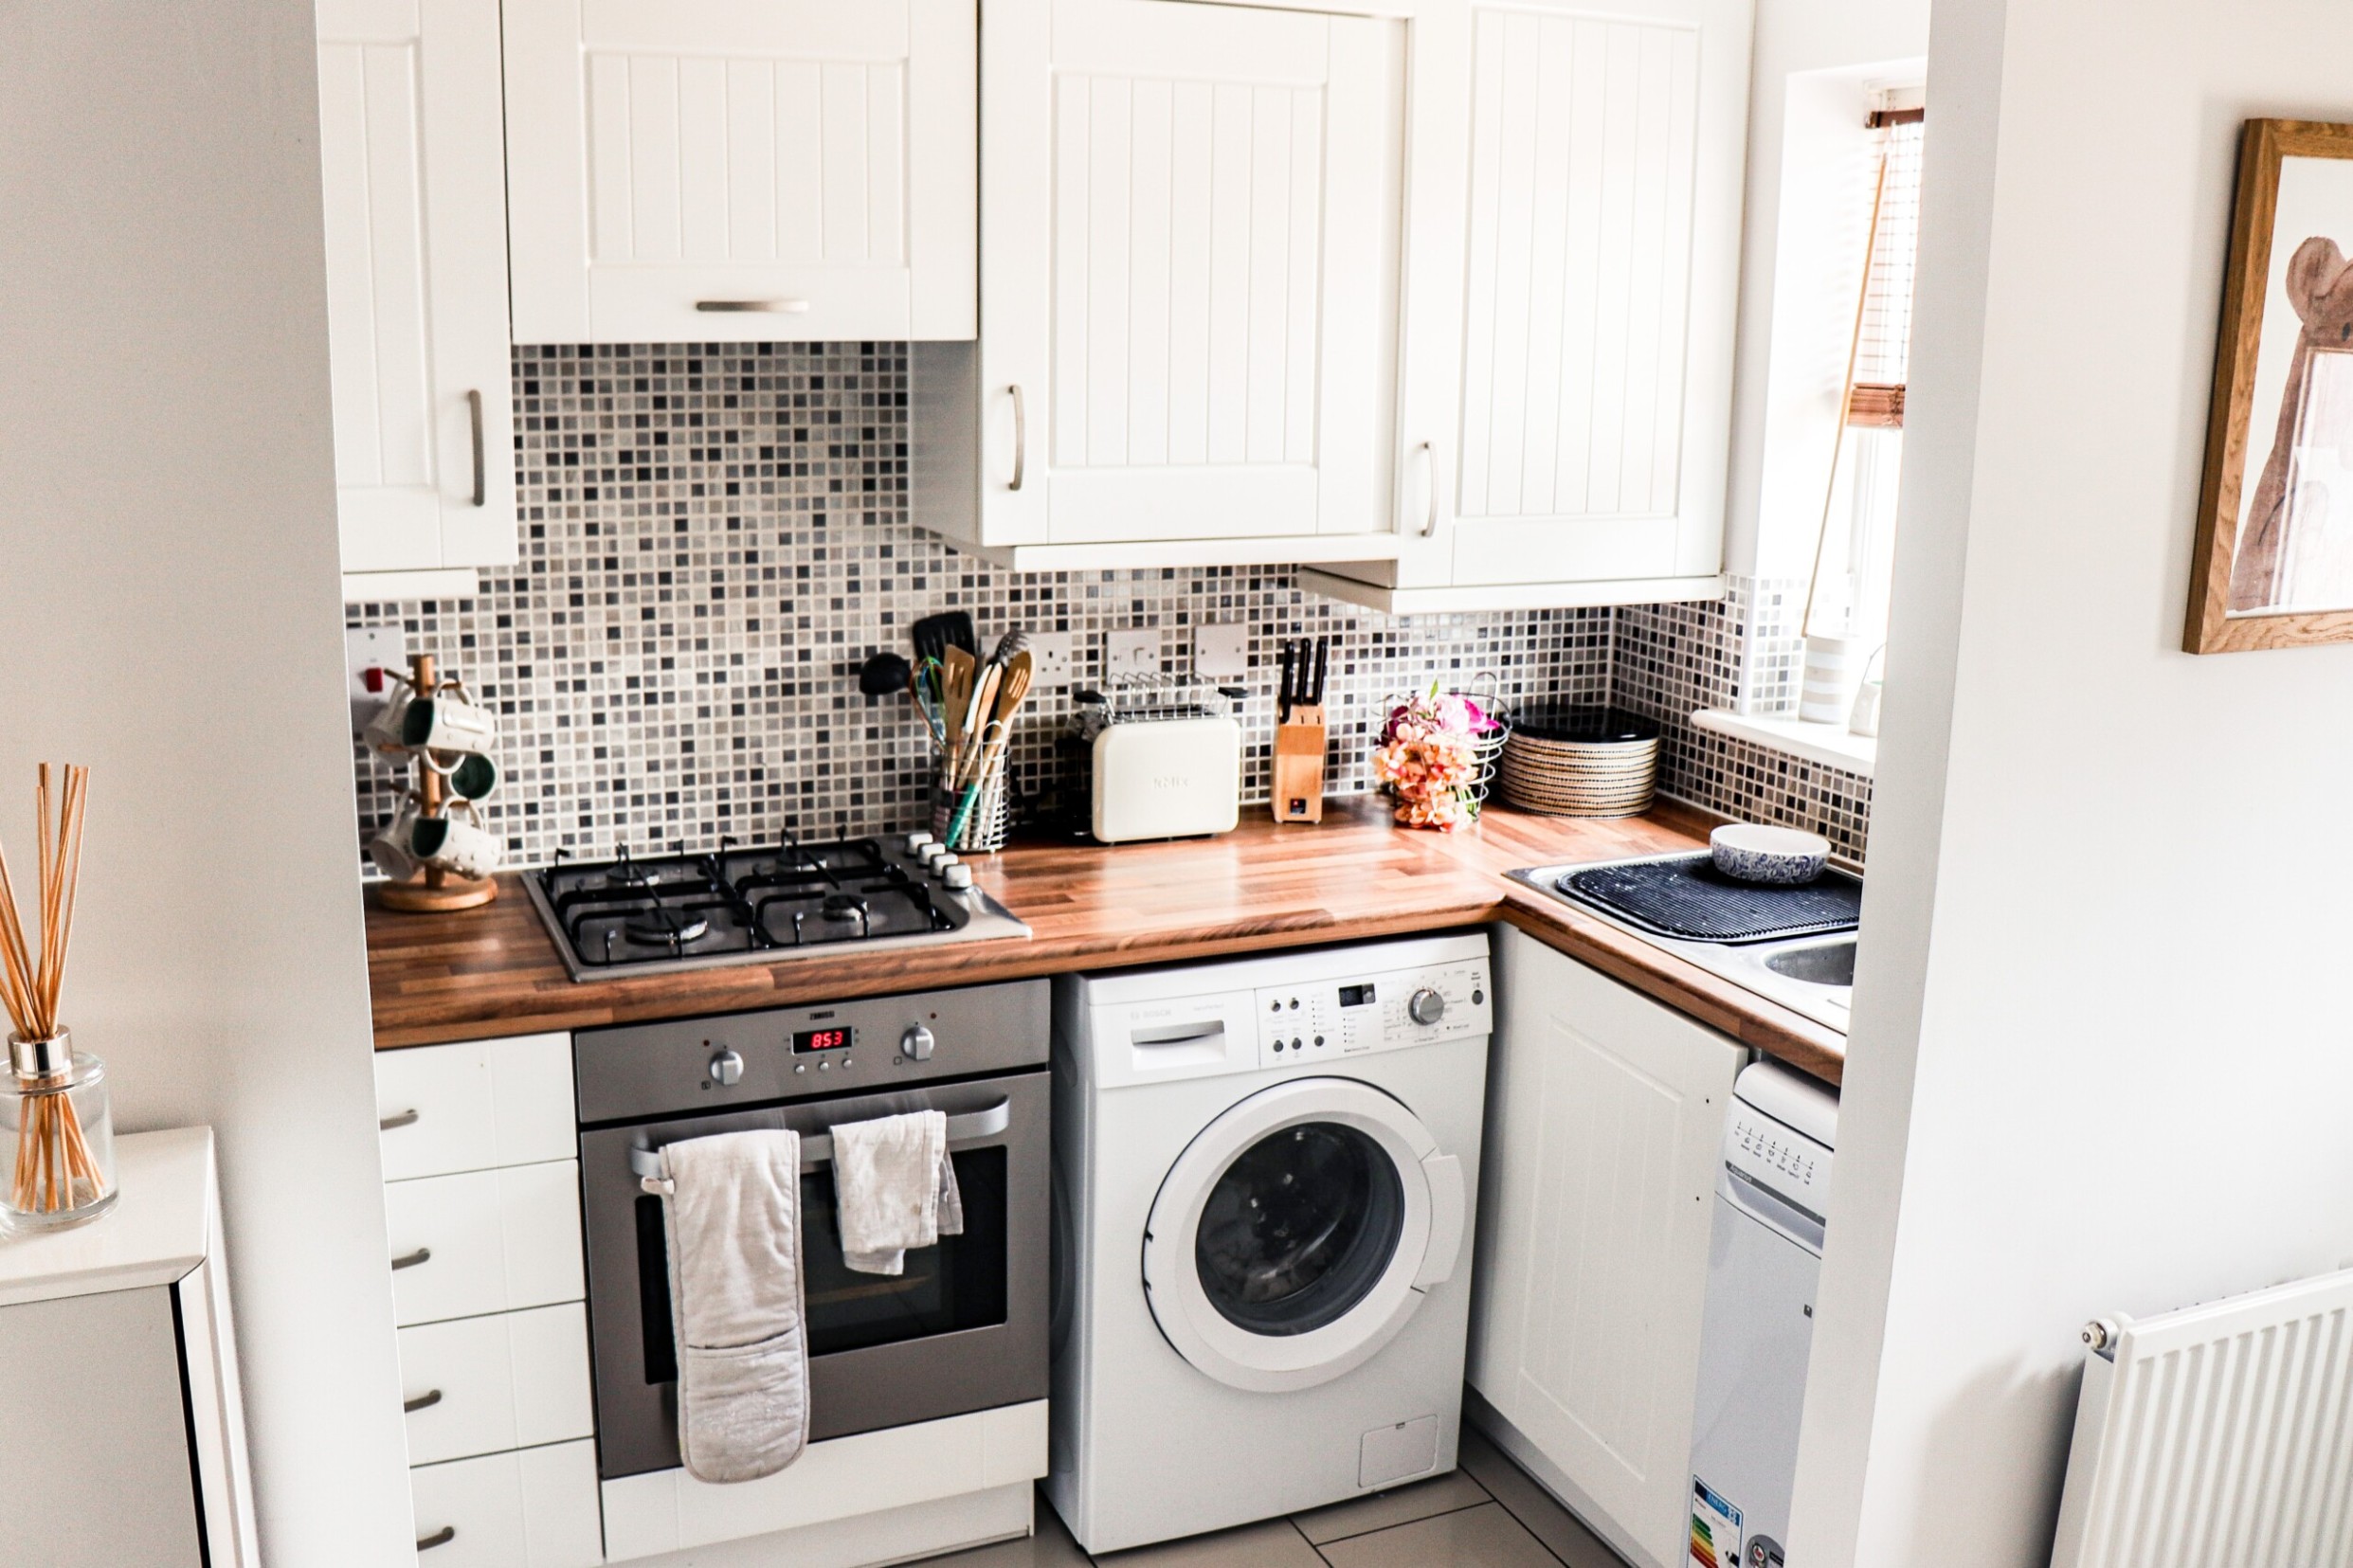 Small Kitchen Renovation Ideas 8  Top 8 Tips To Try - Décor Aid - kitchen renovation ideas small spaces